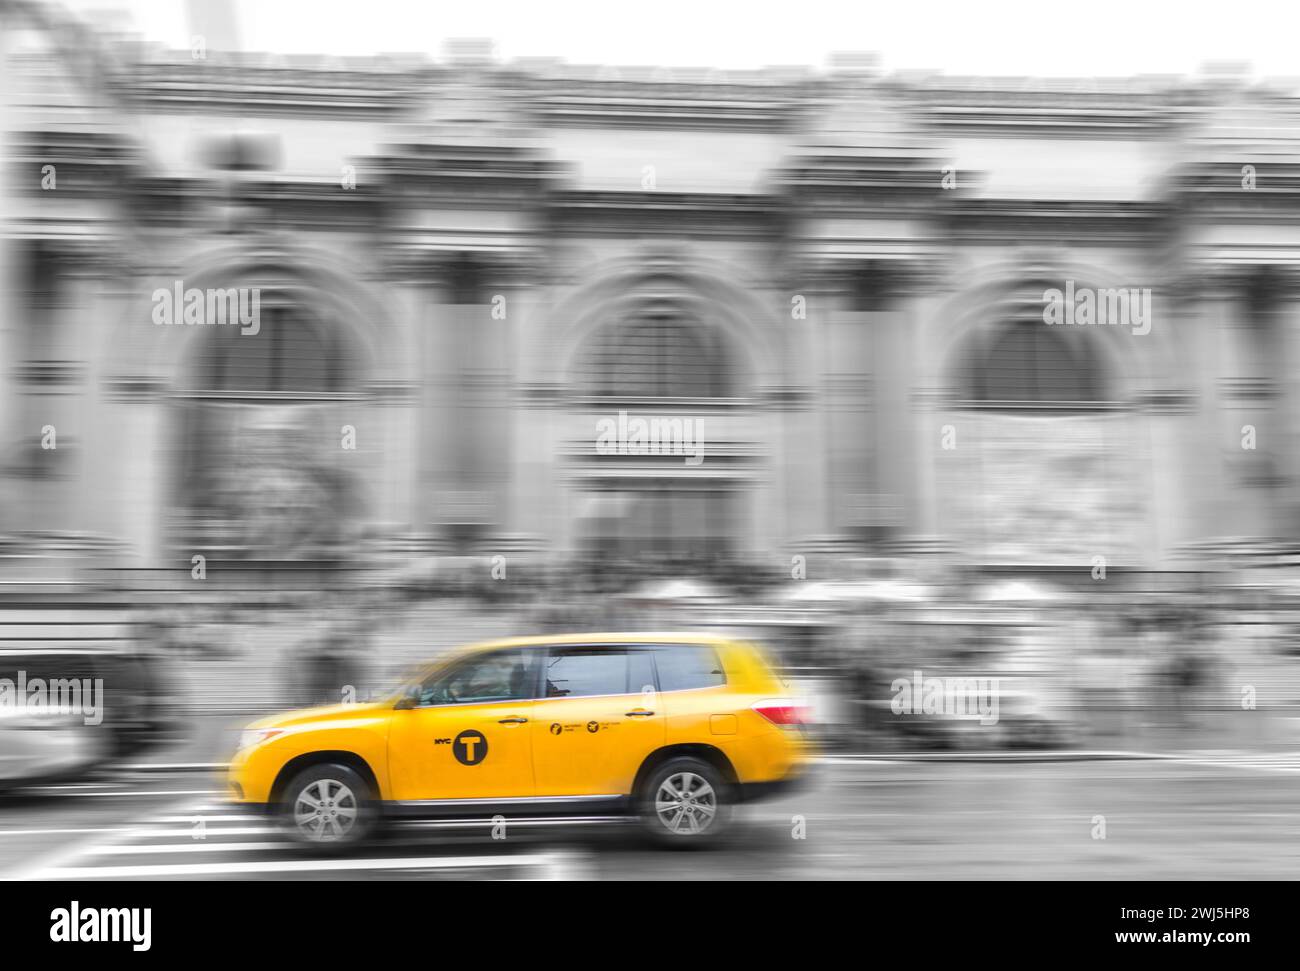 Yellow taxi Cab at The Metropolitan museum in New York City in black and white toning with motion blur effect Stock Photo